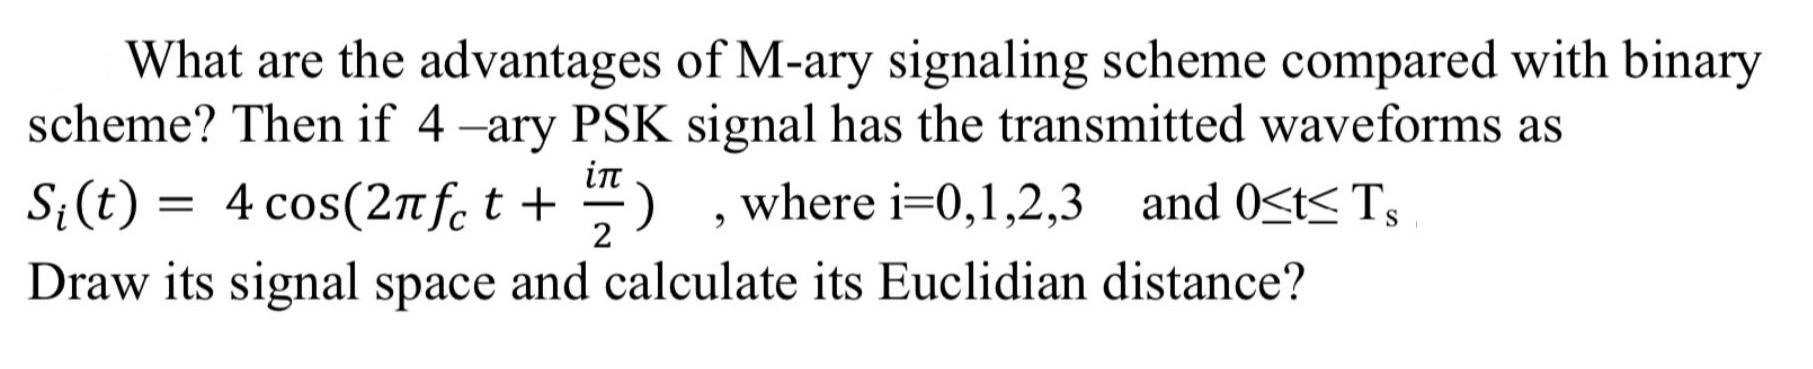 What are the advantages of M-ary signaling scheme compared with binary scheme? Then if 4-ary PSK signal has